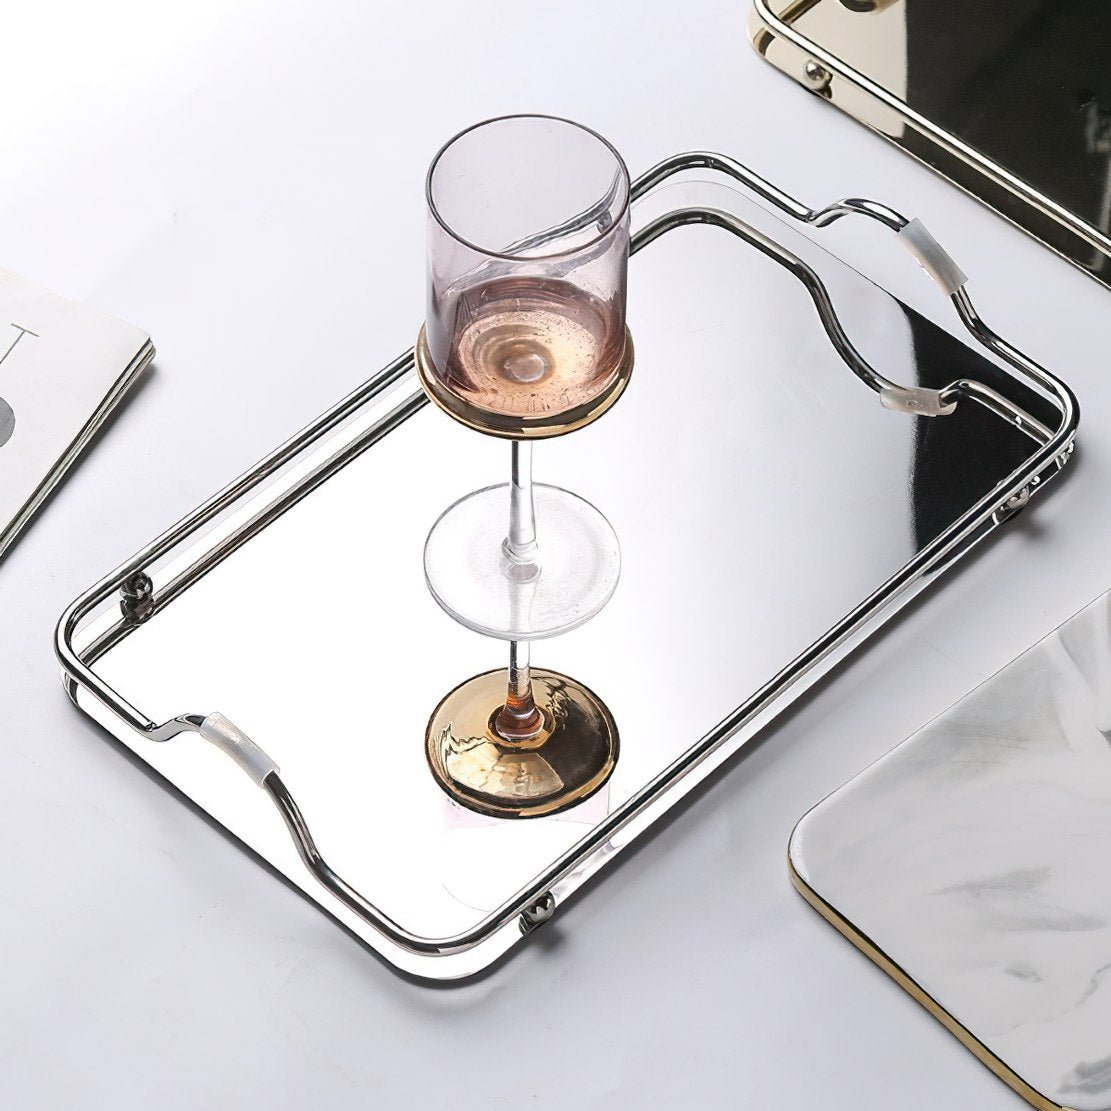 Metallic silver serving tray with wine glass